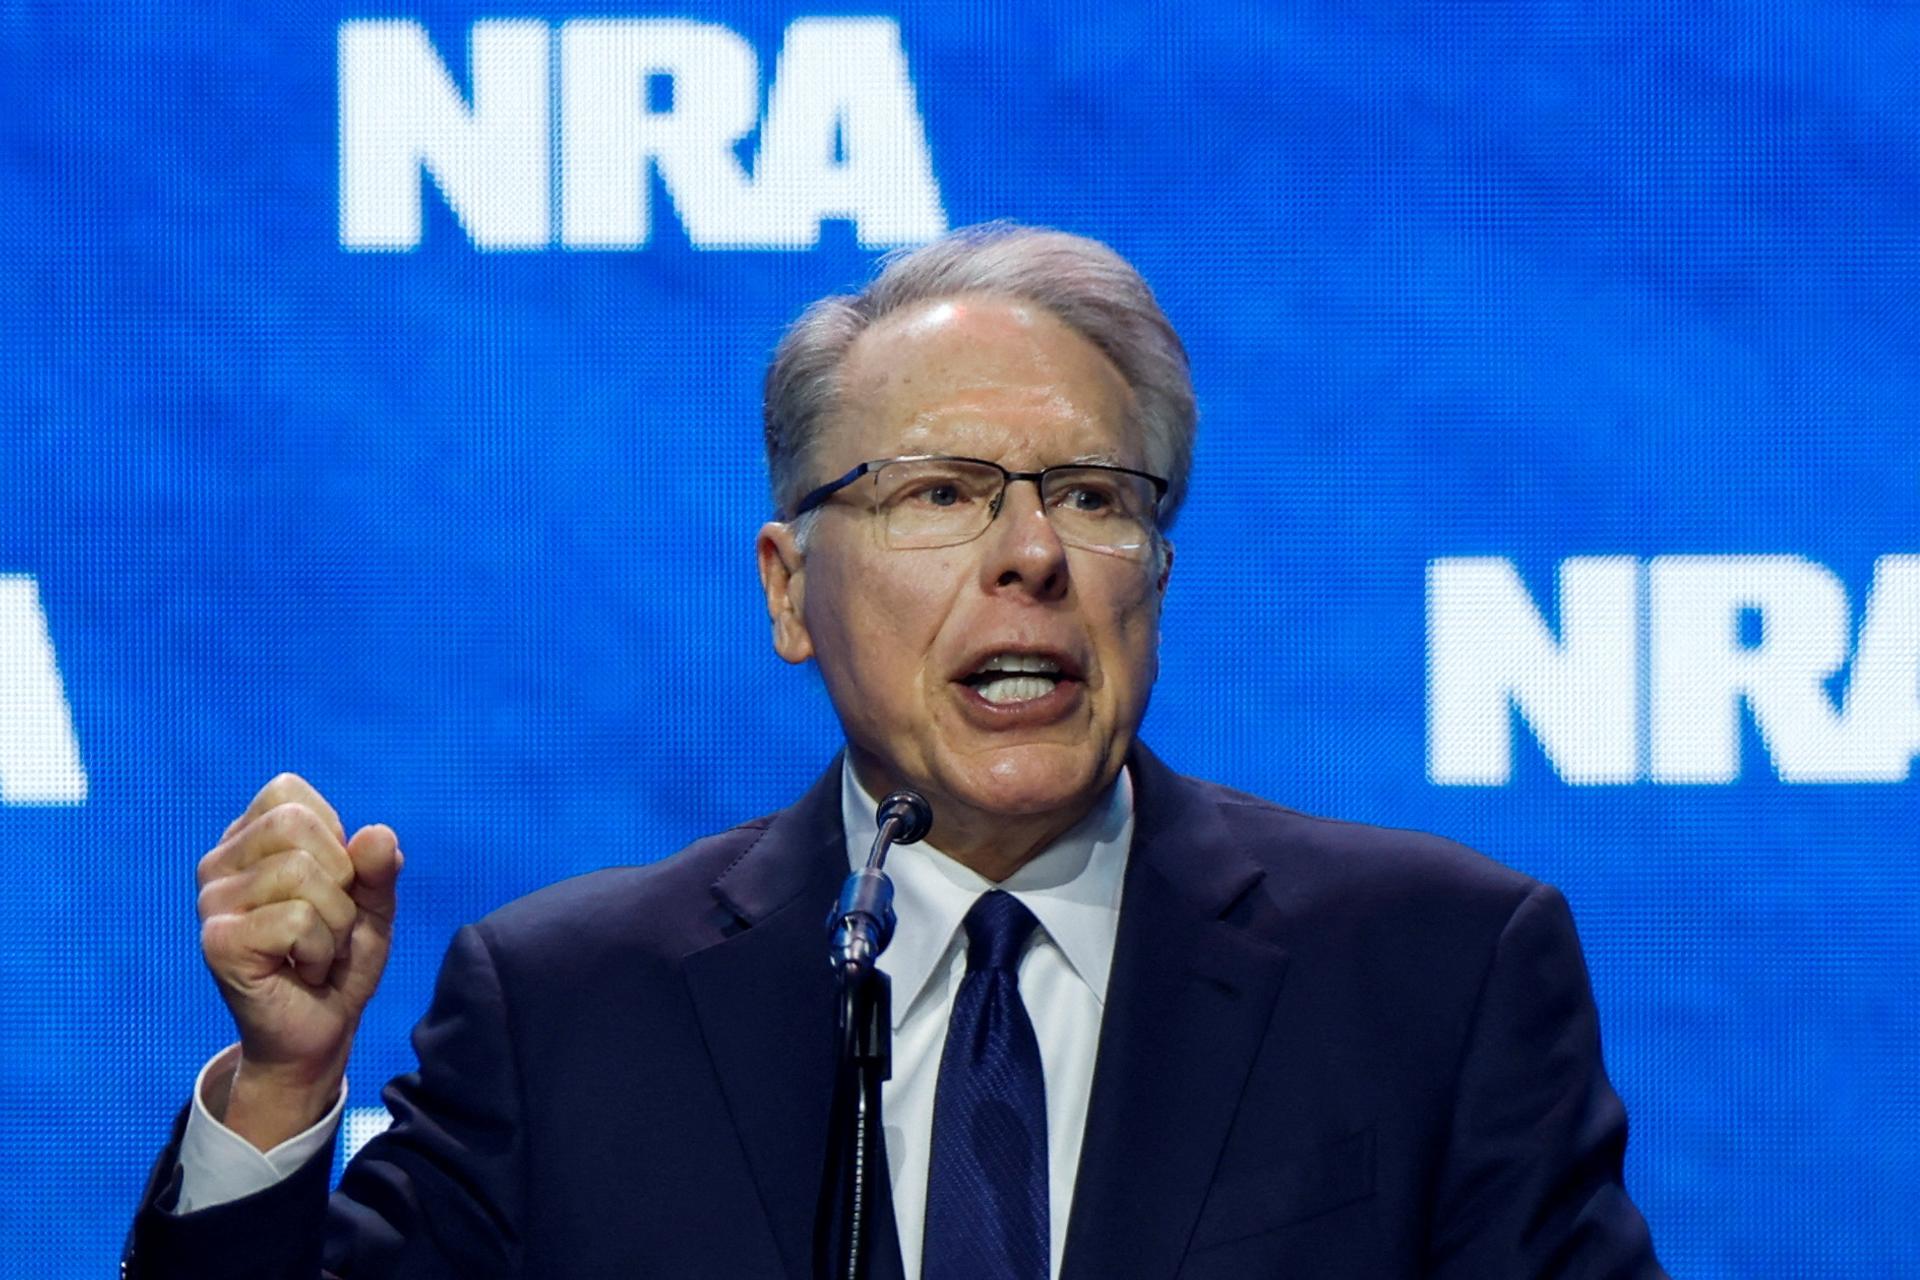  NRA Executive Vice President and CEO Wayne LaPierre speaks at the National Rifle Association (NRA) annual convention in Indianapolis, Indiana, U.S., April 14, 2023.